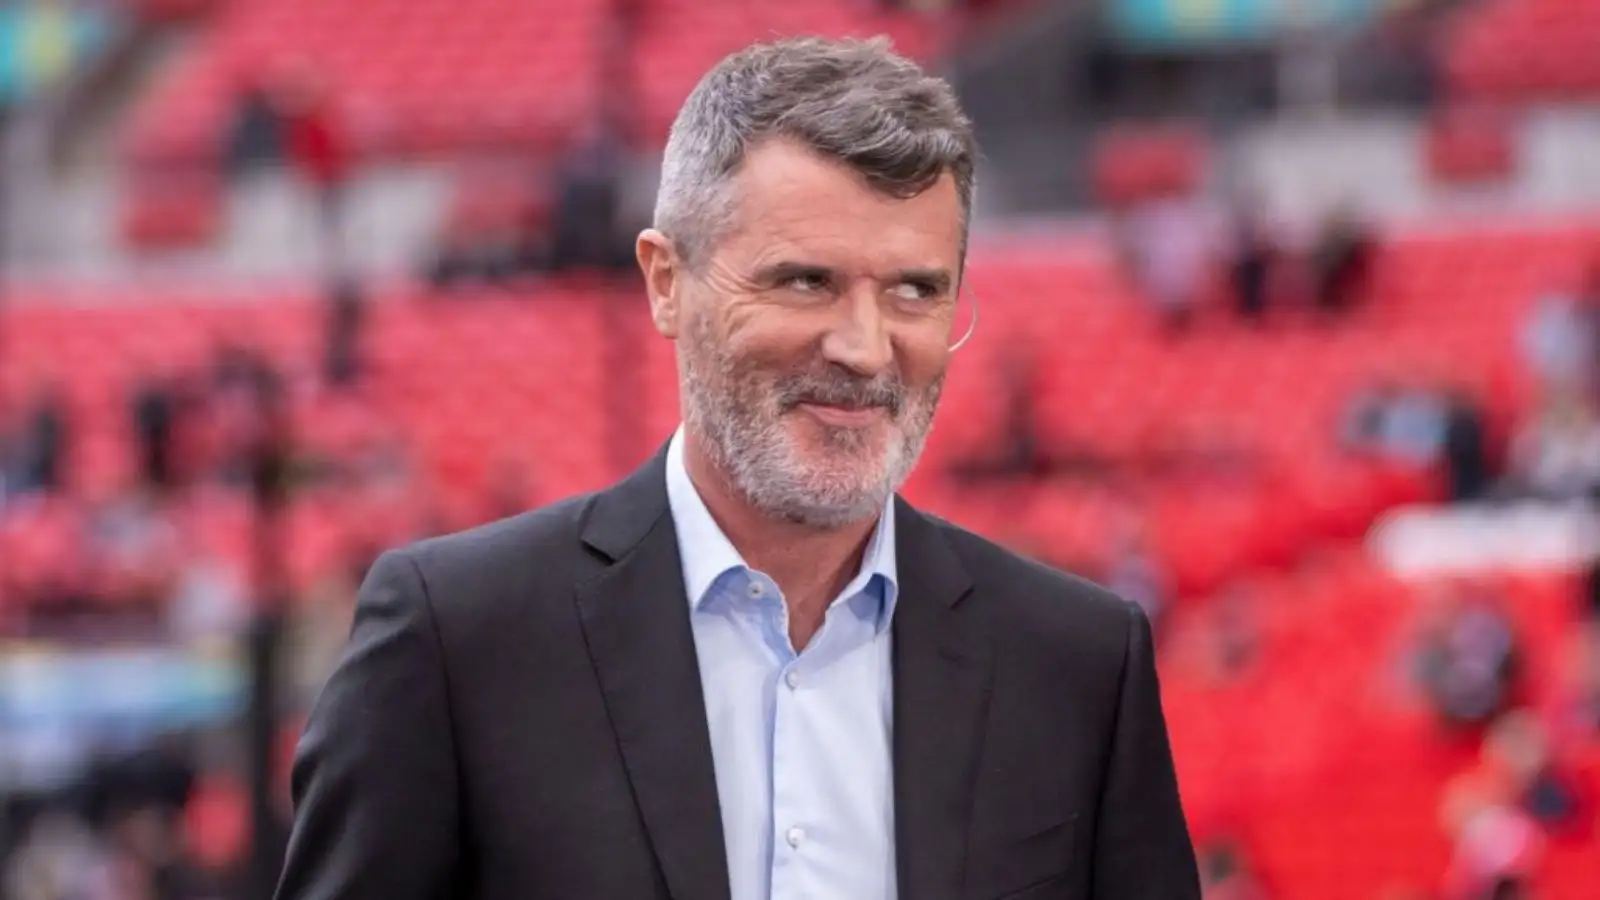 Roy Keane gives a cheeky smile during ITV coverage.